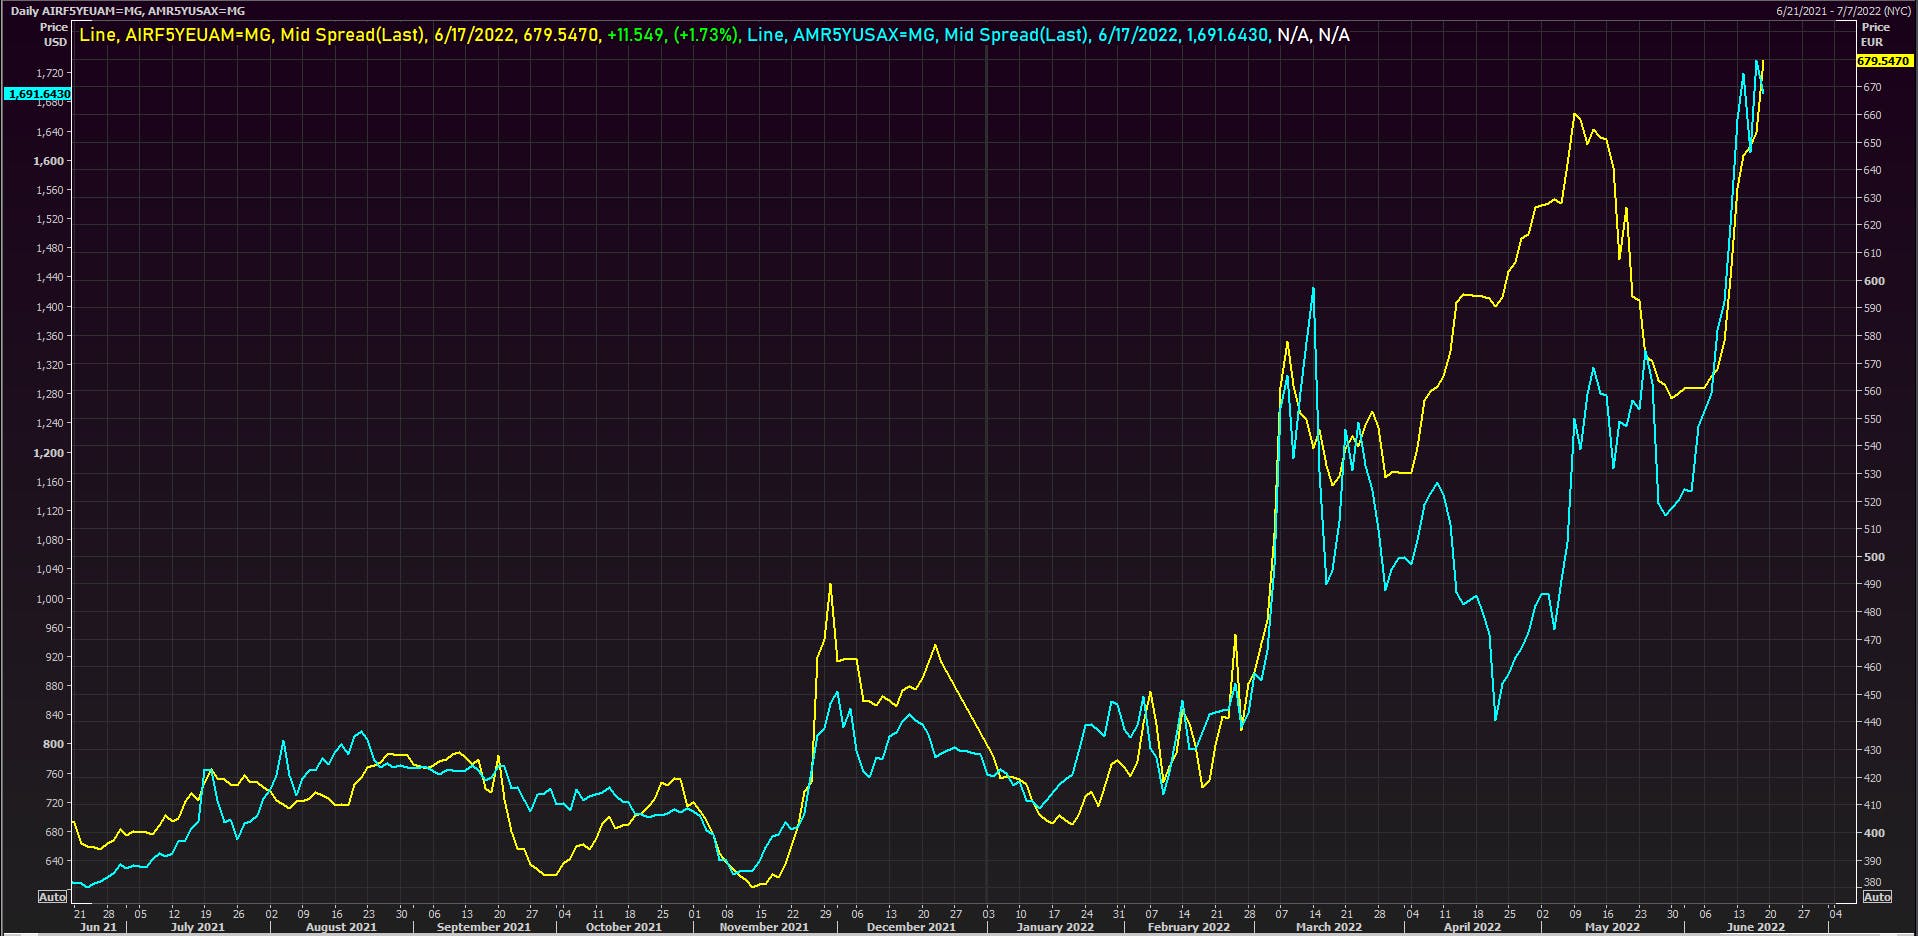 Air France & American Airlines 5Y CDS Mid Spreads | Source: Refinitiv